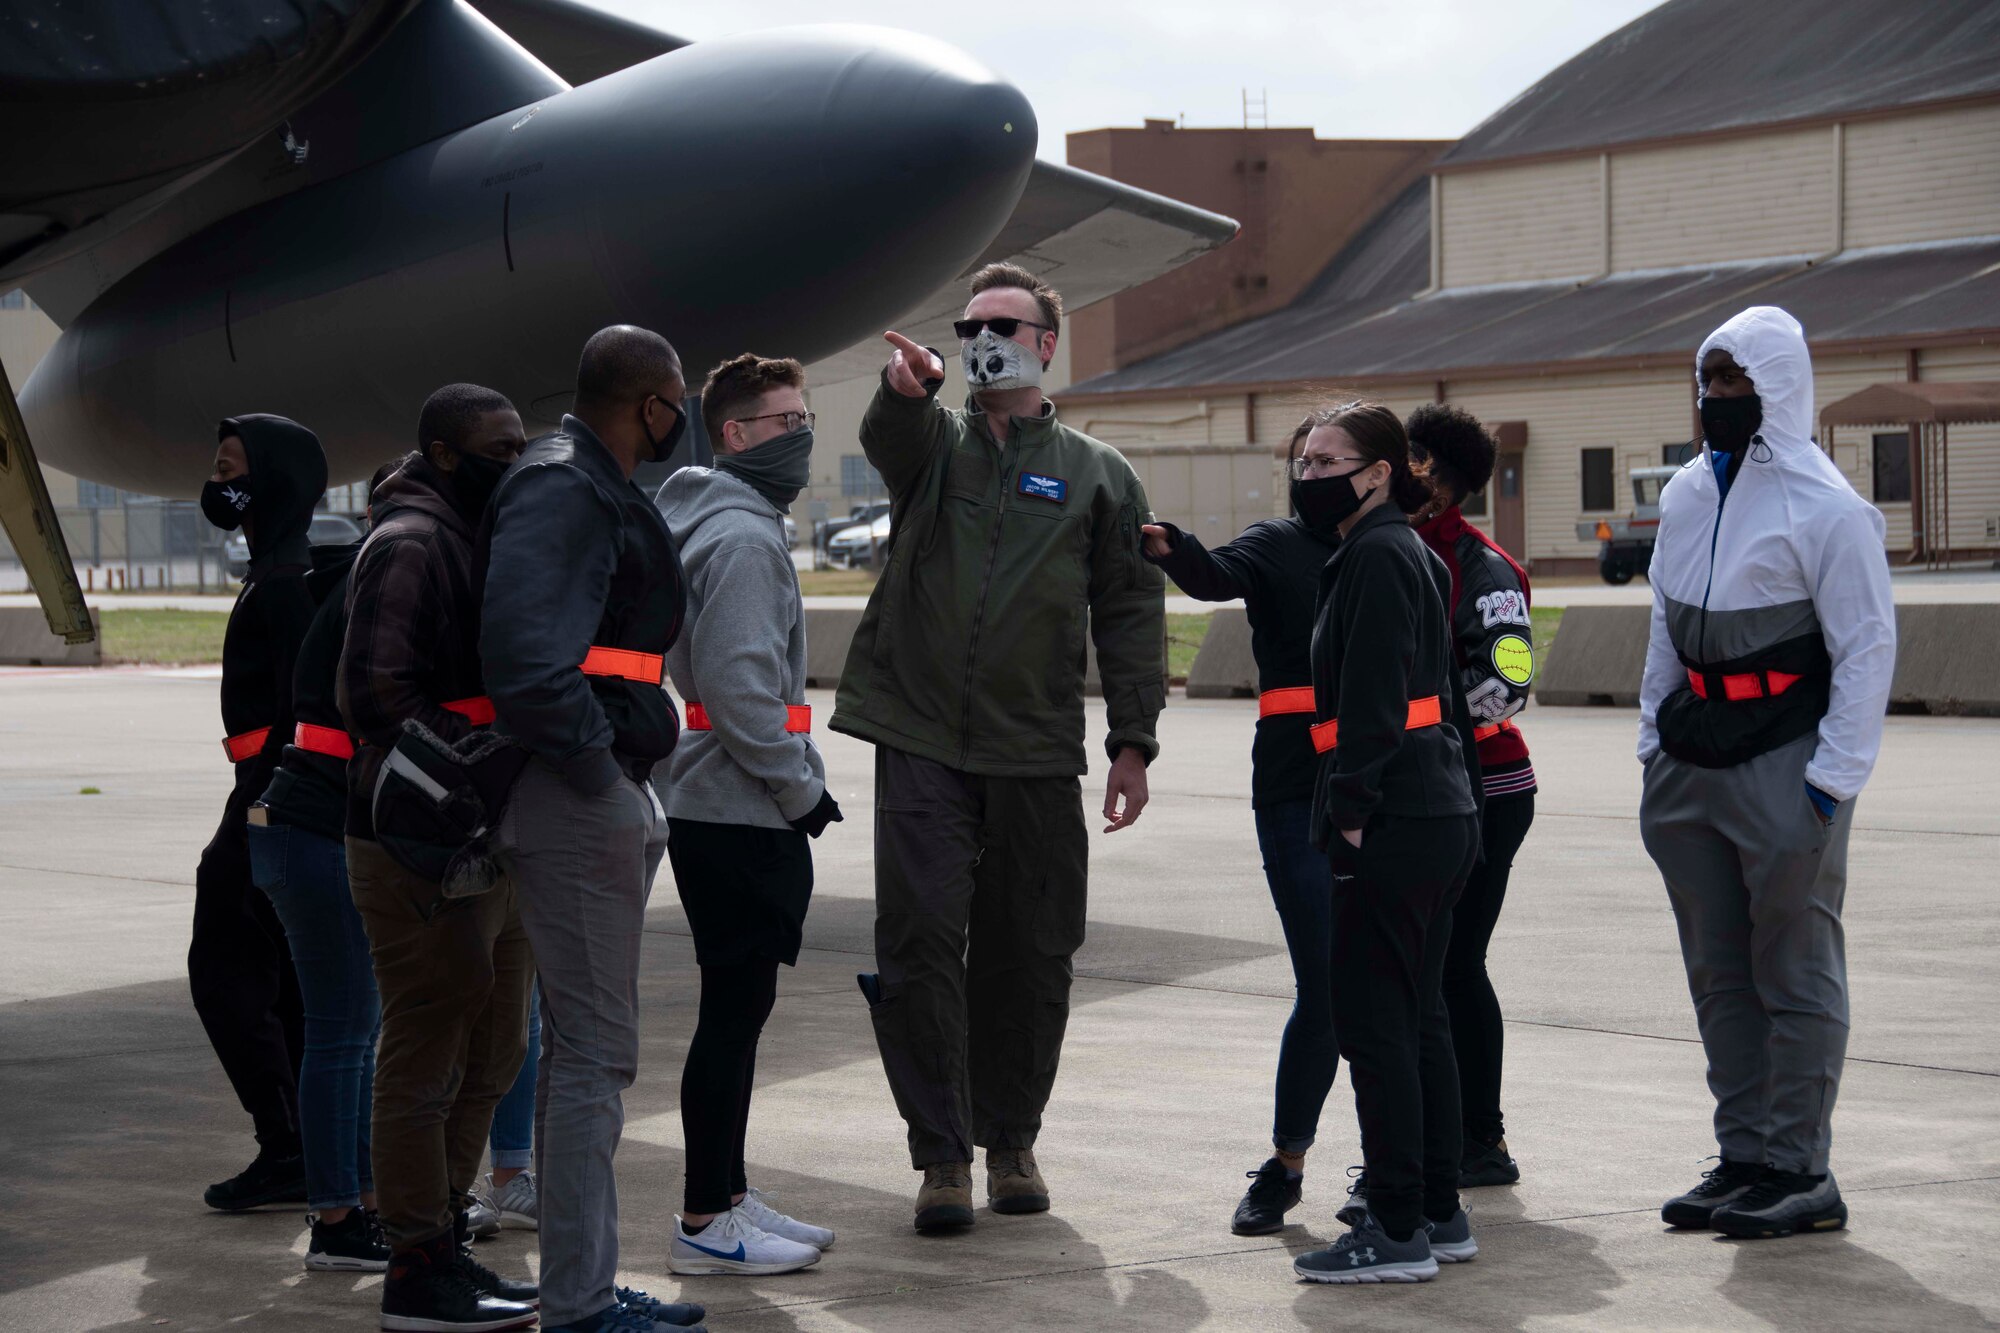 An Airman points at a B-52 as trainees look on.